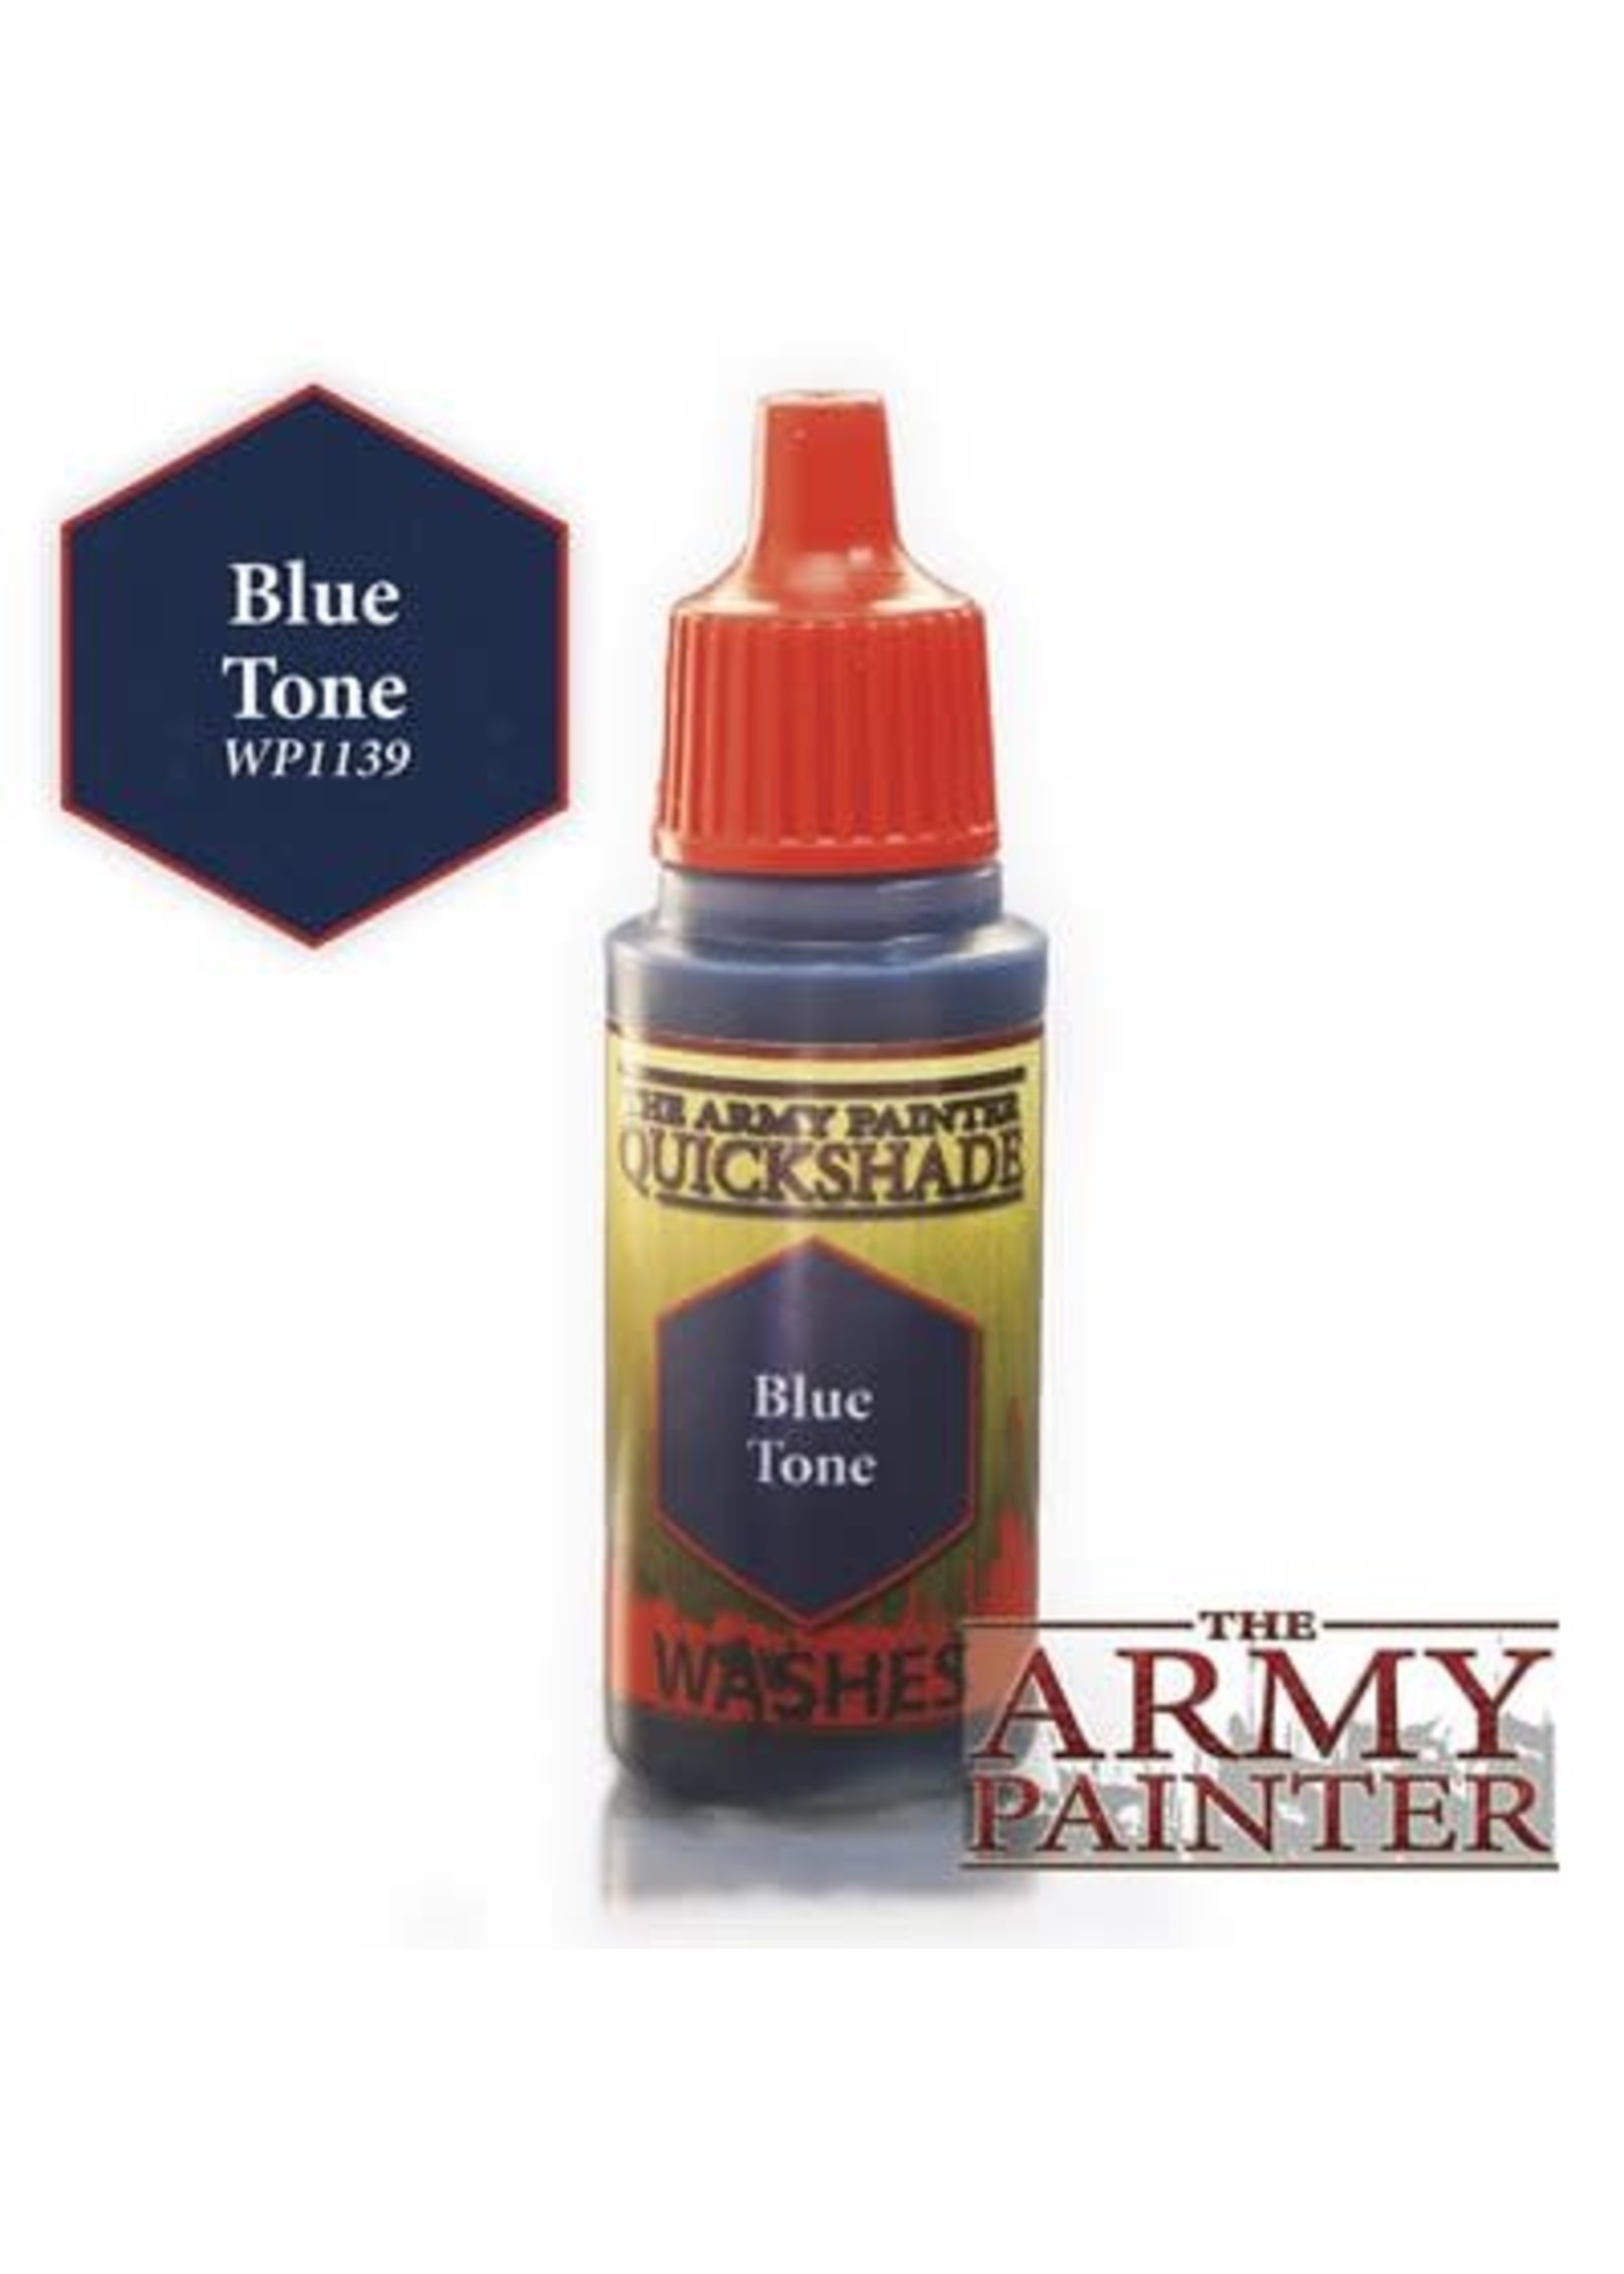 The Army Painter Blue Tone - Washes Warpaints - The Army Painter